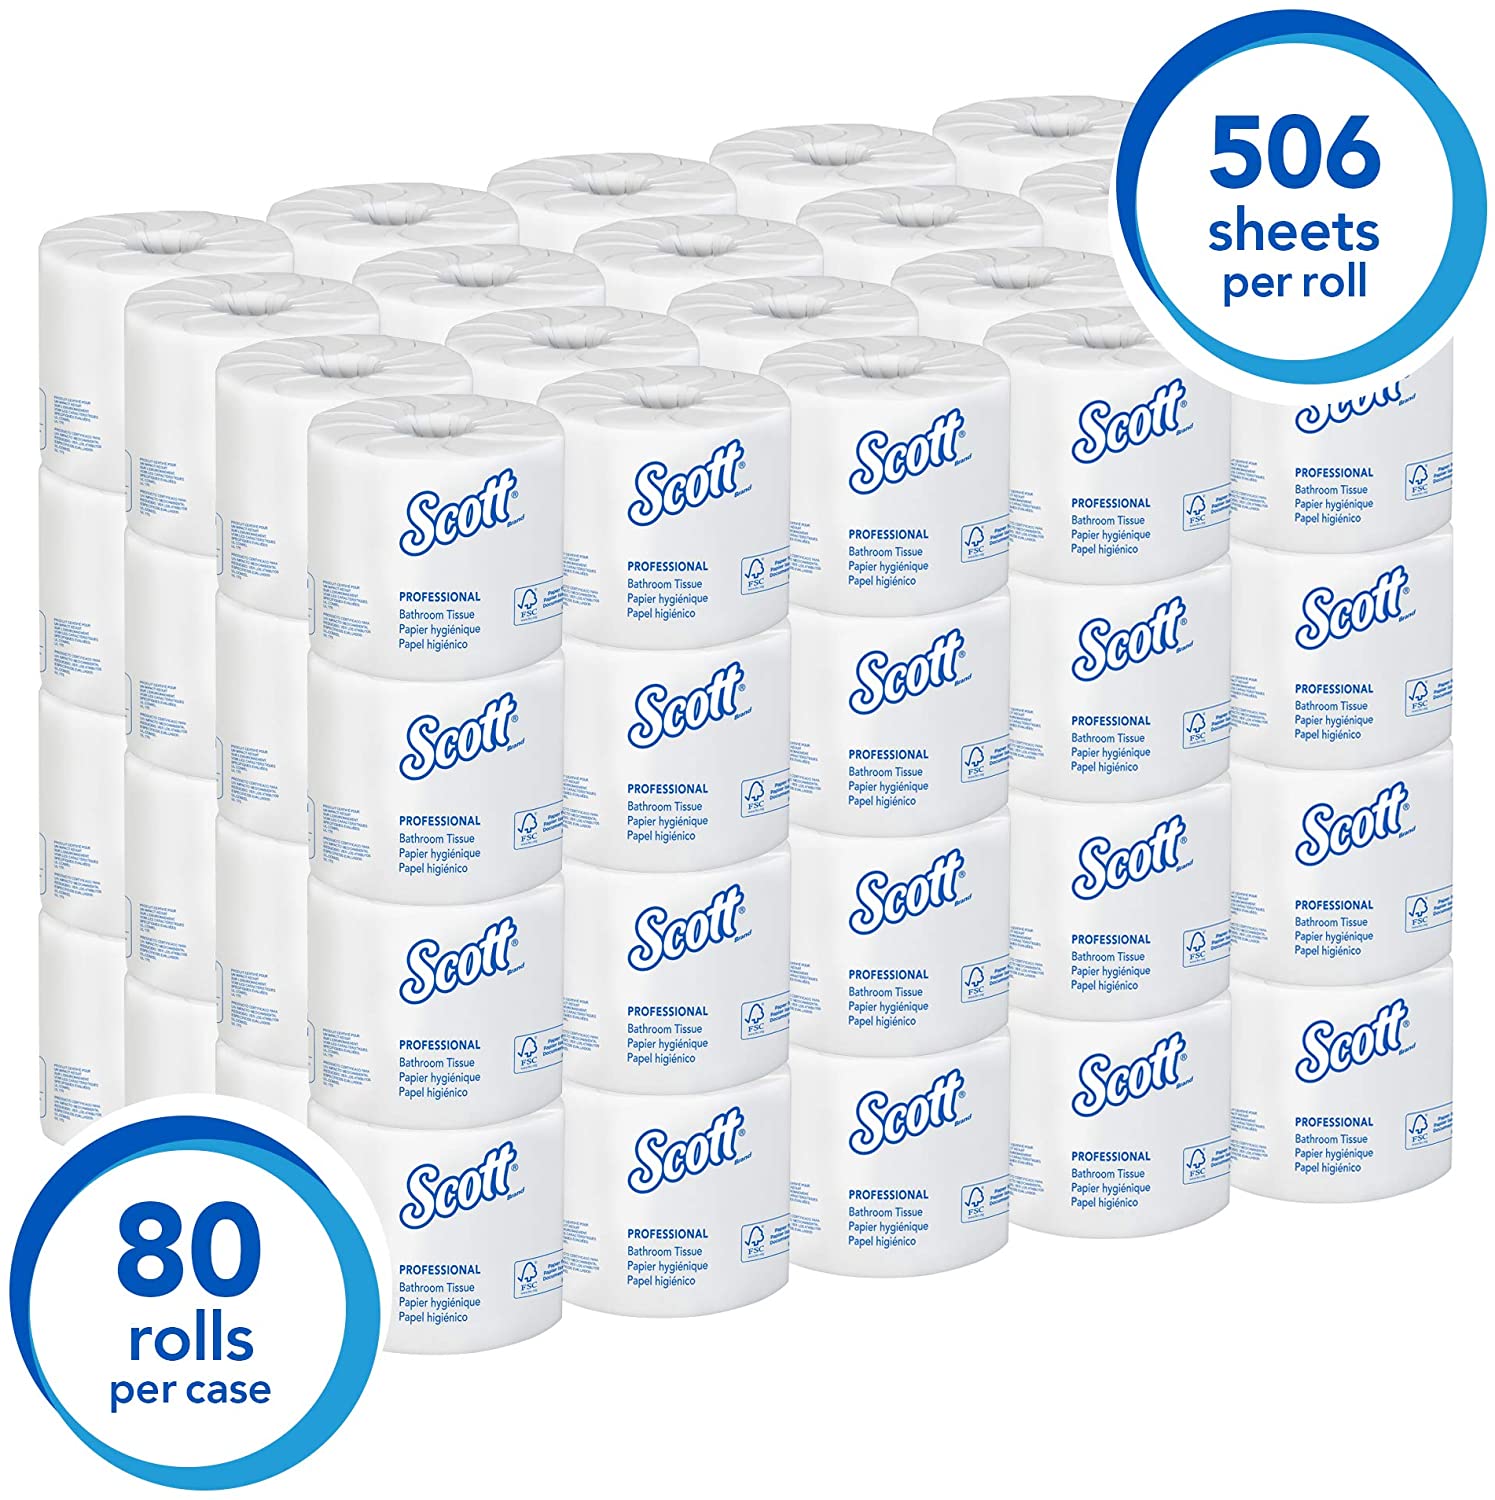 Scott Essential Professional 100% Recycled Fiber Bulk Toilet Paper for Business (13217), 2-Ply Standard Rolls, White, 80 Rolls/Case, 506 Sheets/Roll